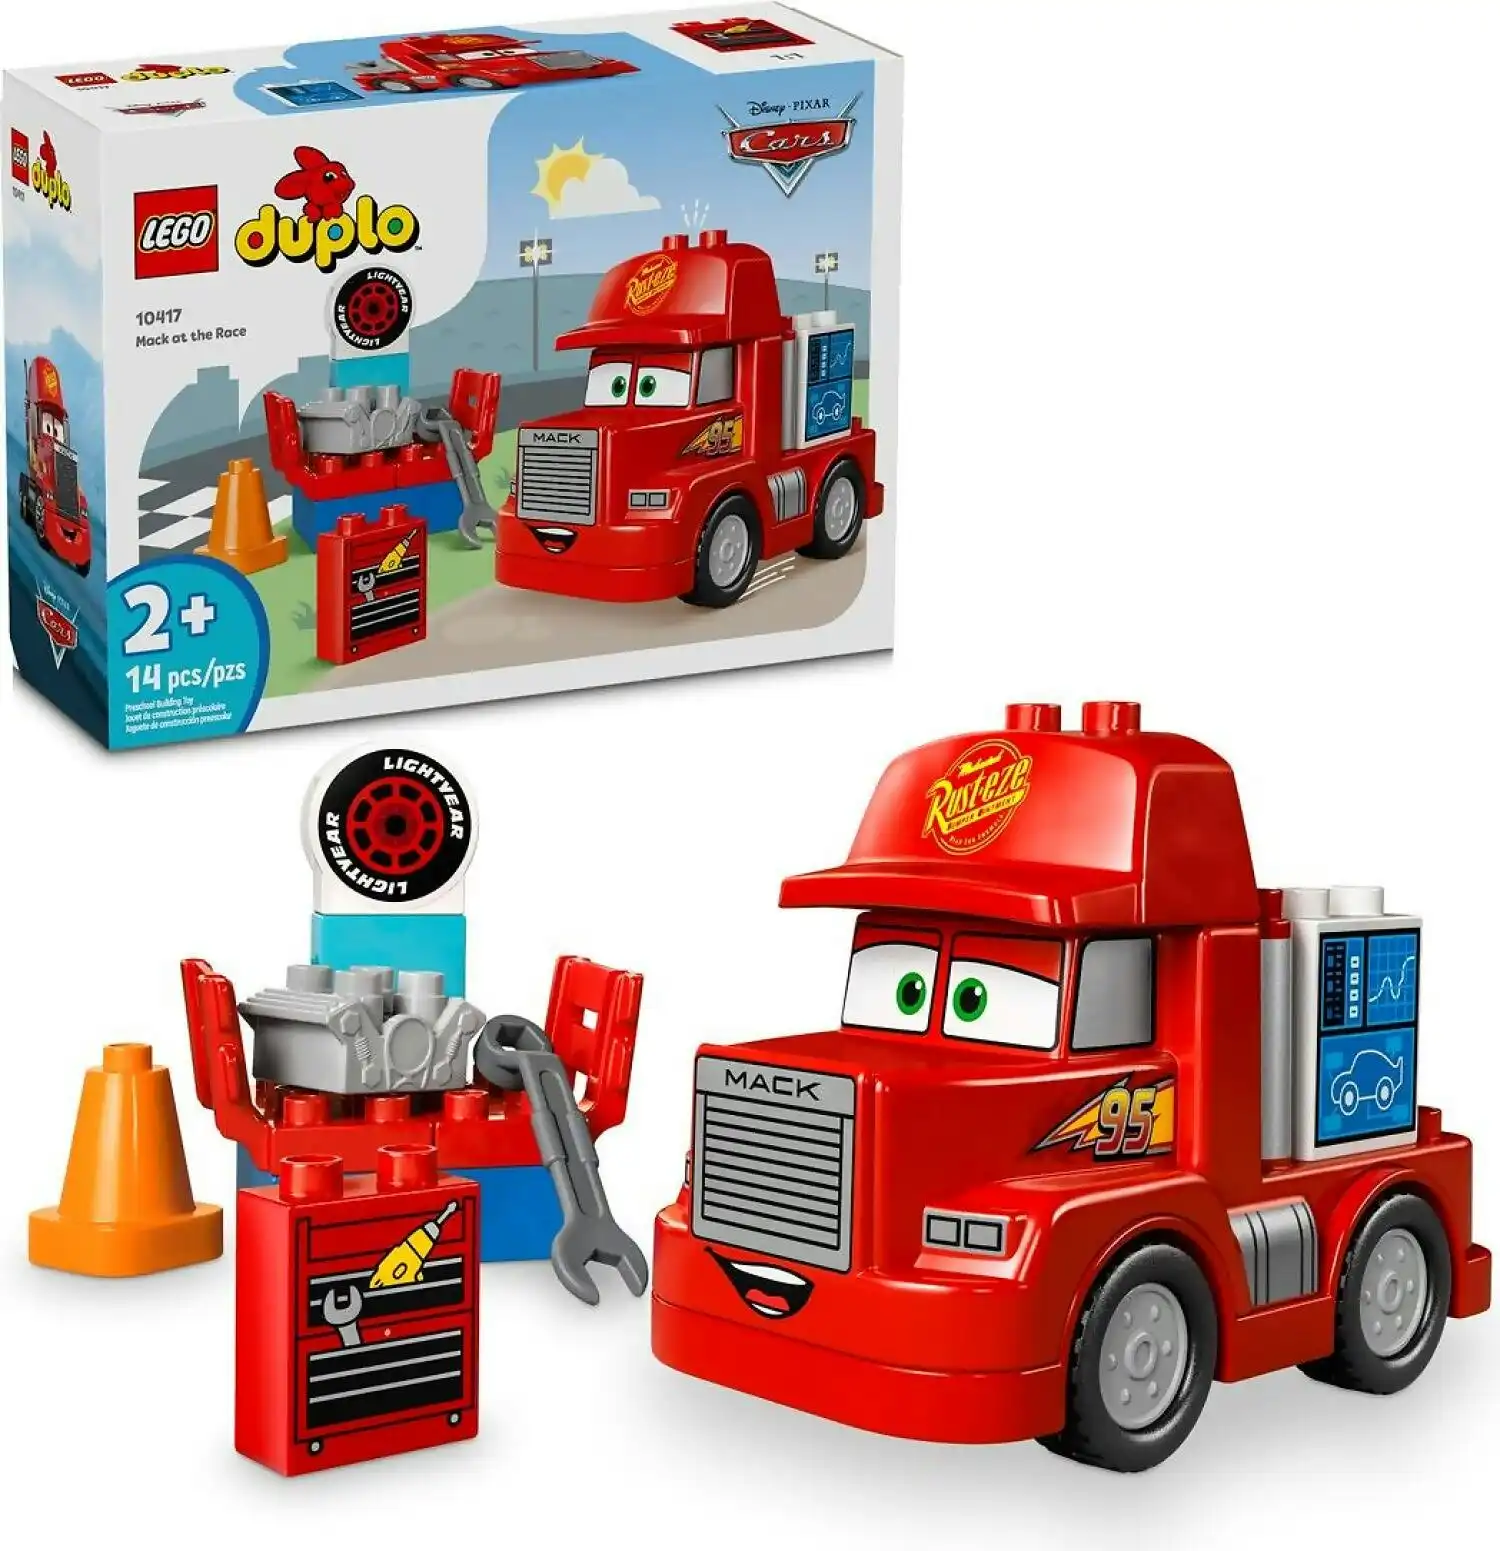 LEGO 10417 Mack at the Race - Duplo